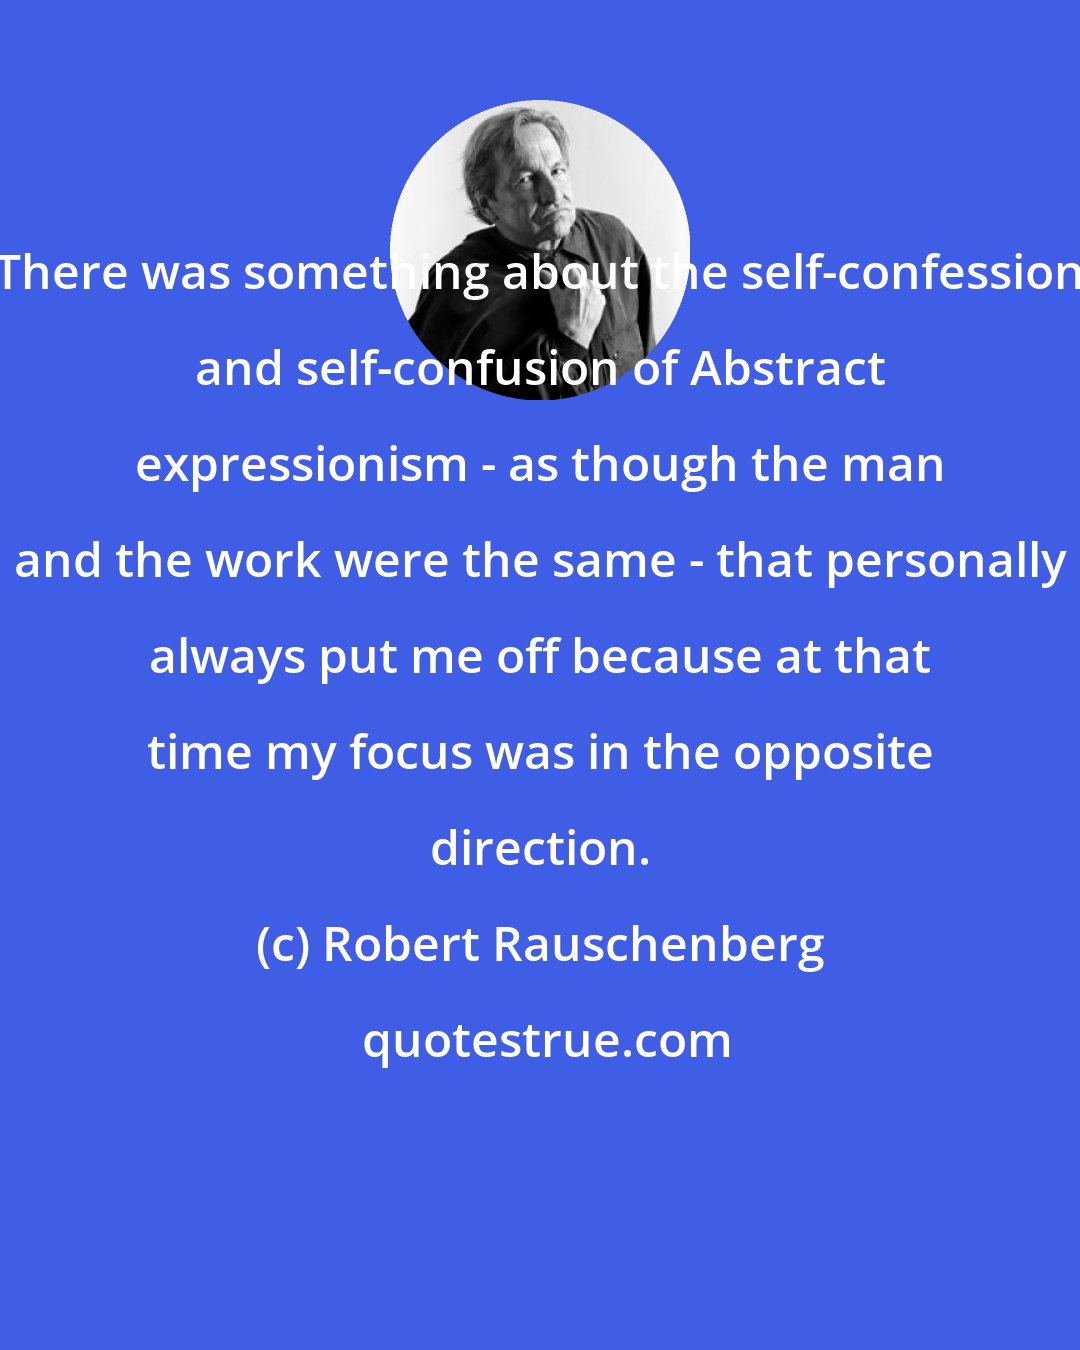 Robert Rauschenberg: There was something about the self-confession and self-confusion of Abstract expressionism - as though the man and the work were the same - that personally always put me off because at that time my focus was in the opposite direction.